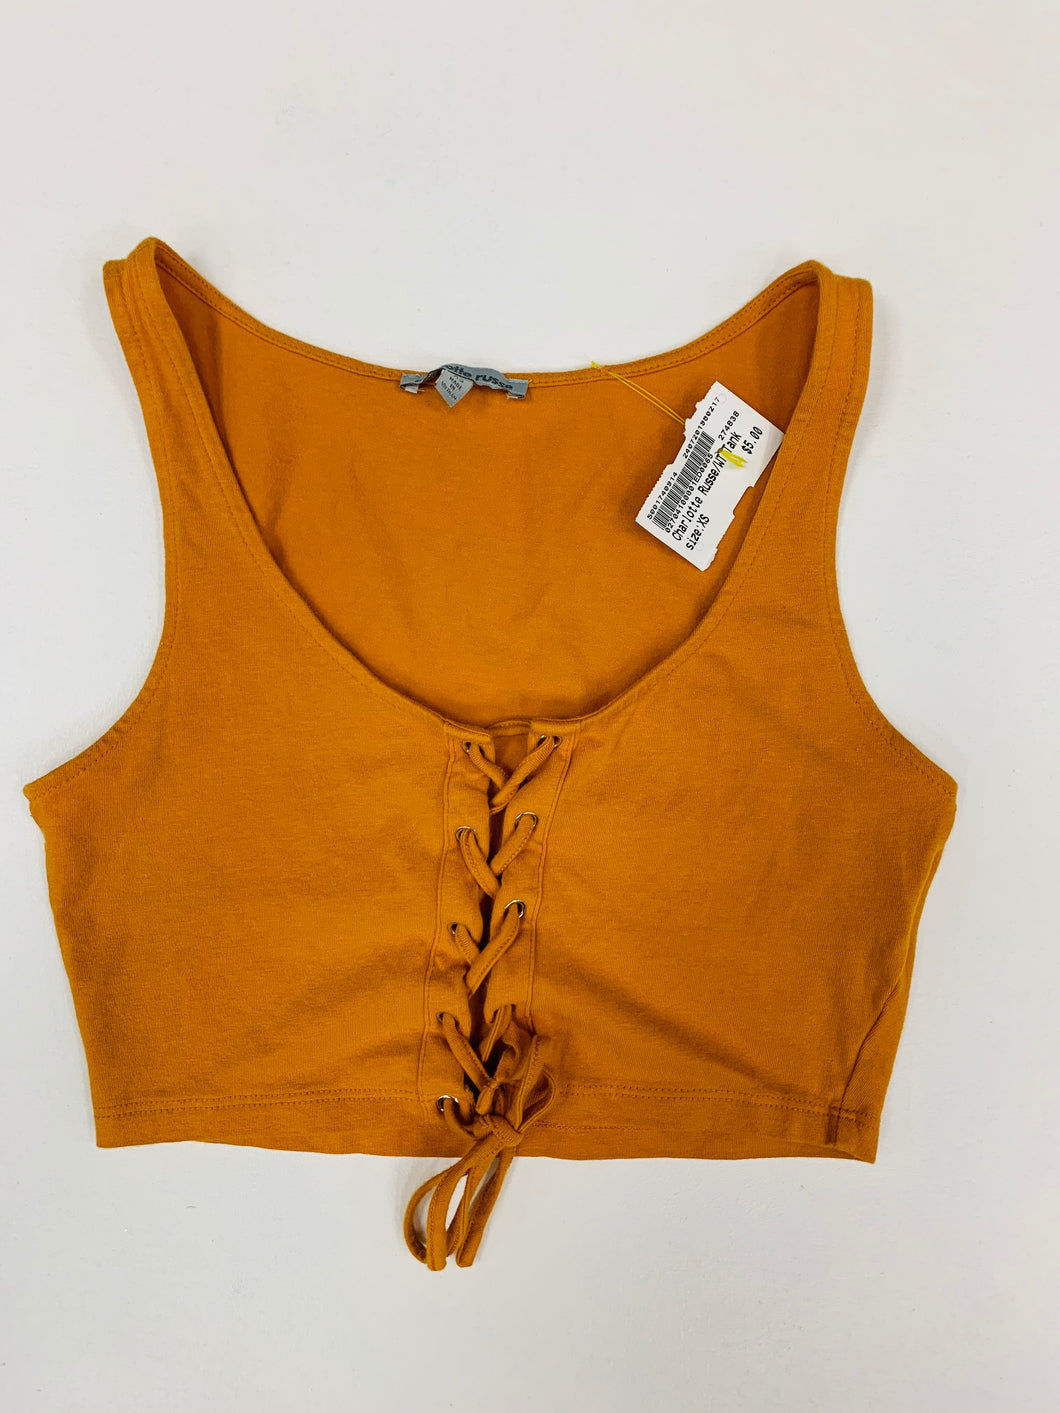 Charlotte Russe Womens Tank Top Extra Small-27746261-18C4-49BF-AED6-C8D32F500AEA.jpeg